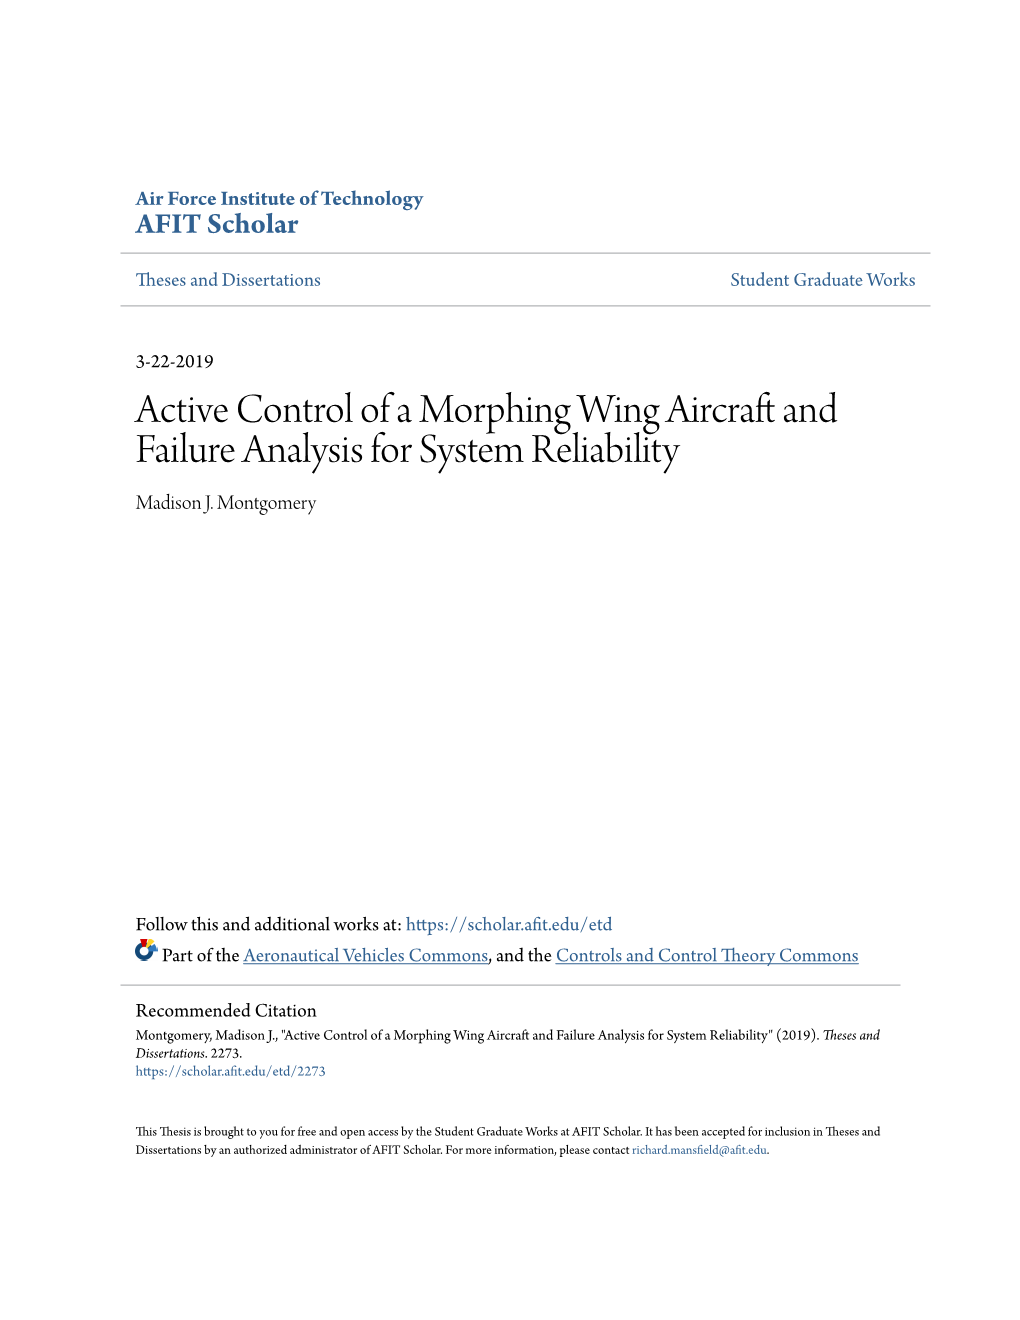 Active Control of a Morphing Wing Aircraft and Failure Analysis for System Reliabiltiy